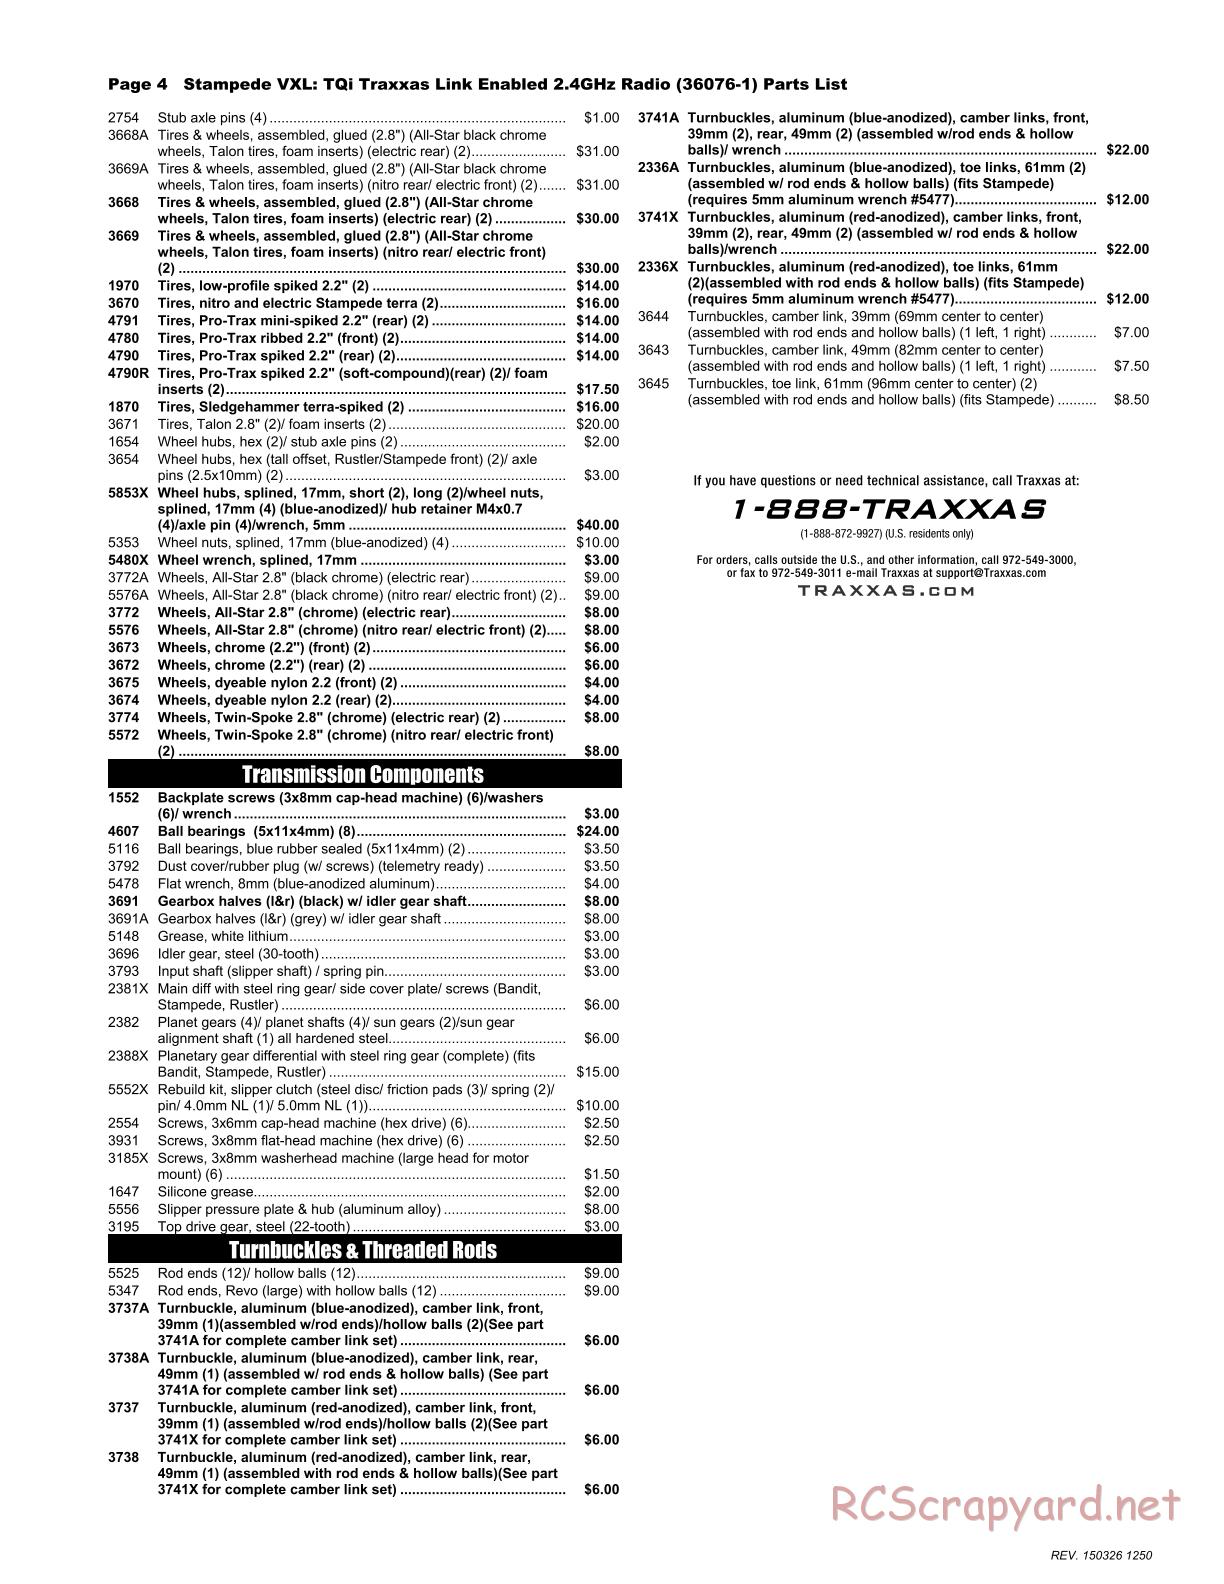 Traxxas - Stampede VXL - Parts List - Page 4